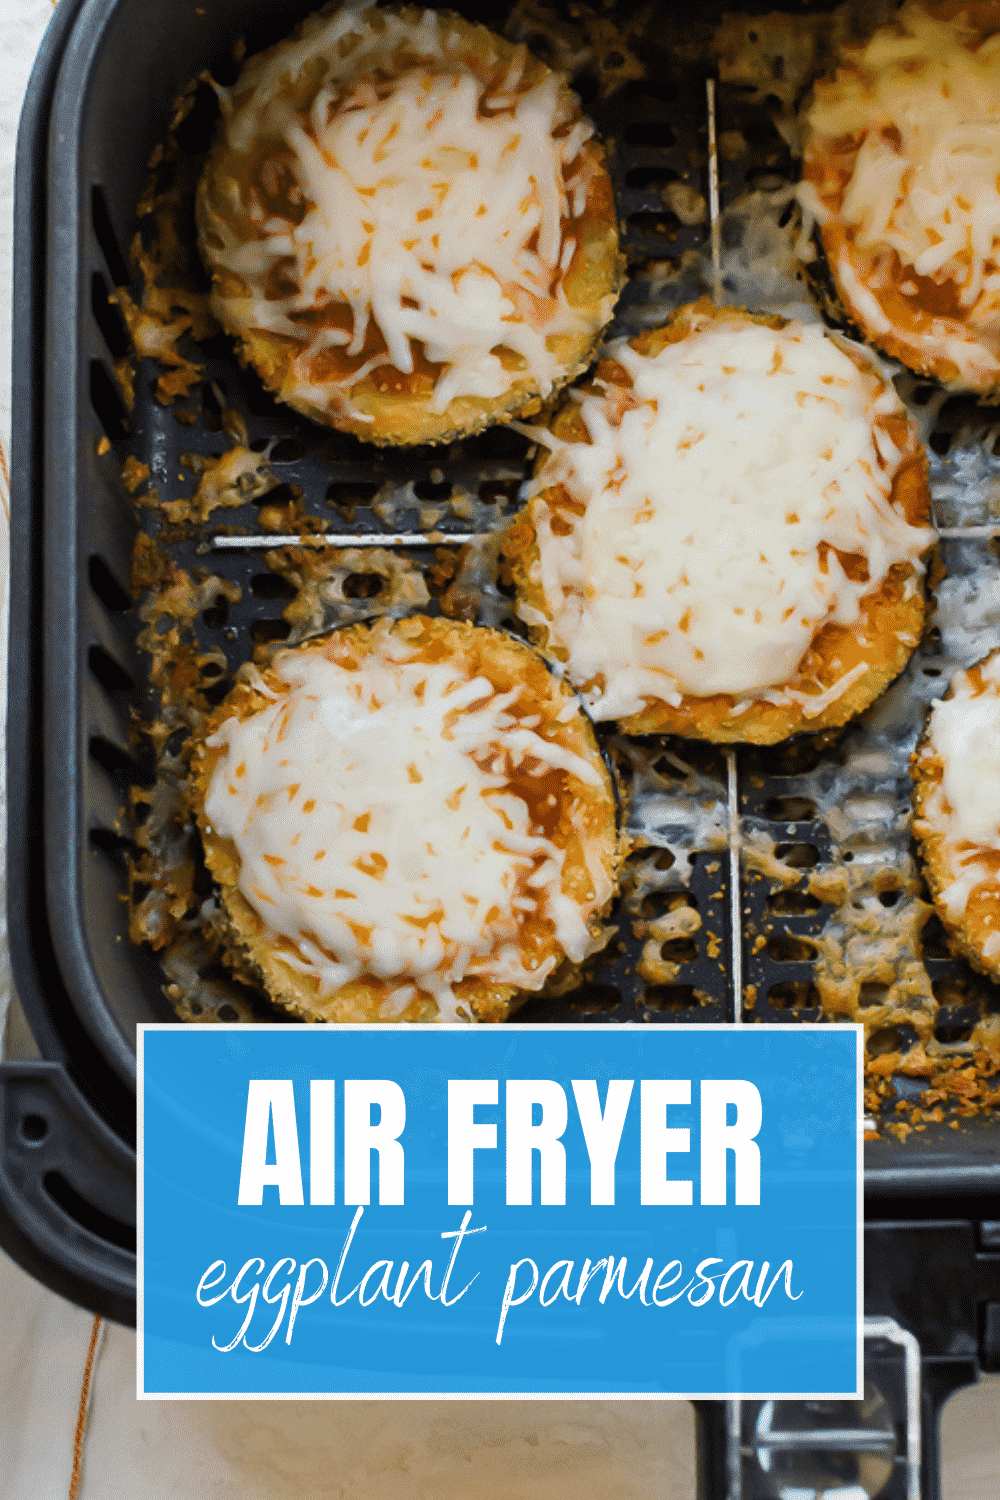 Airfryer eggplant parmesan is a classic vegetarian italian dinner that you can make with less oil and less mess by using your air fryer. Crispy on the outside and perfectly tender on the inside, you’ll love this recipe. #Airfyer #eggplant via @vegetarianmamma